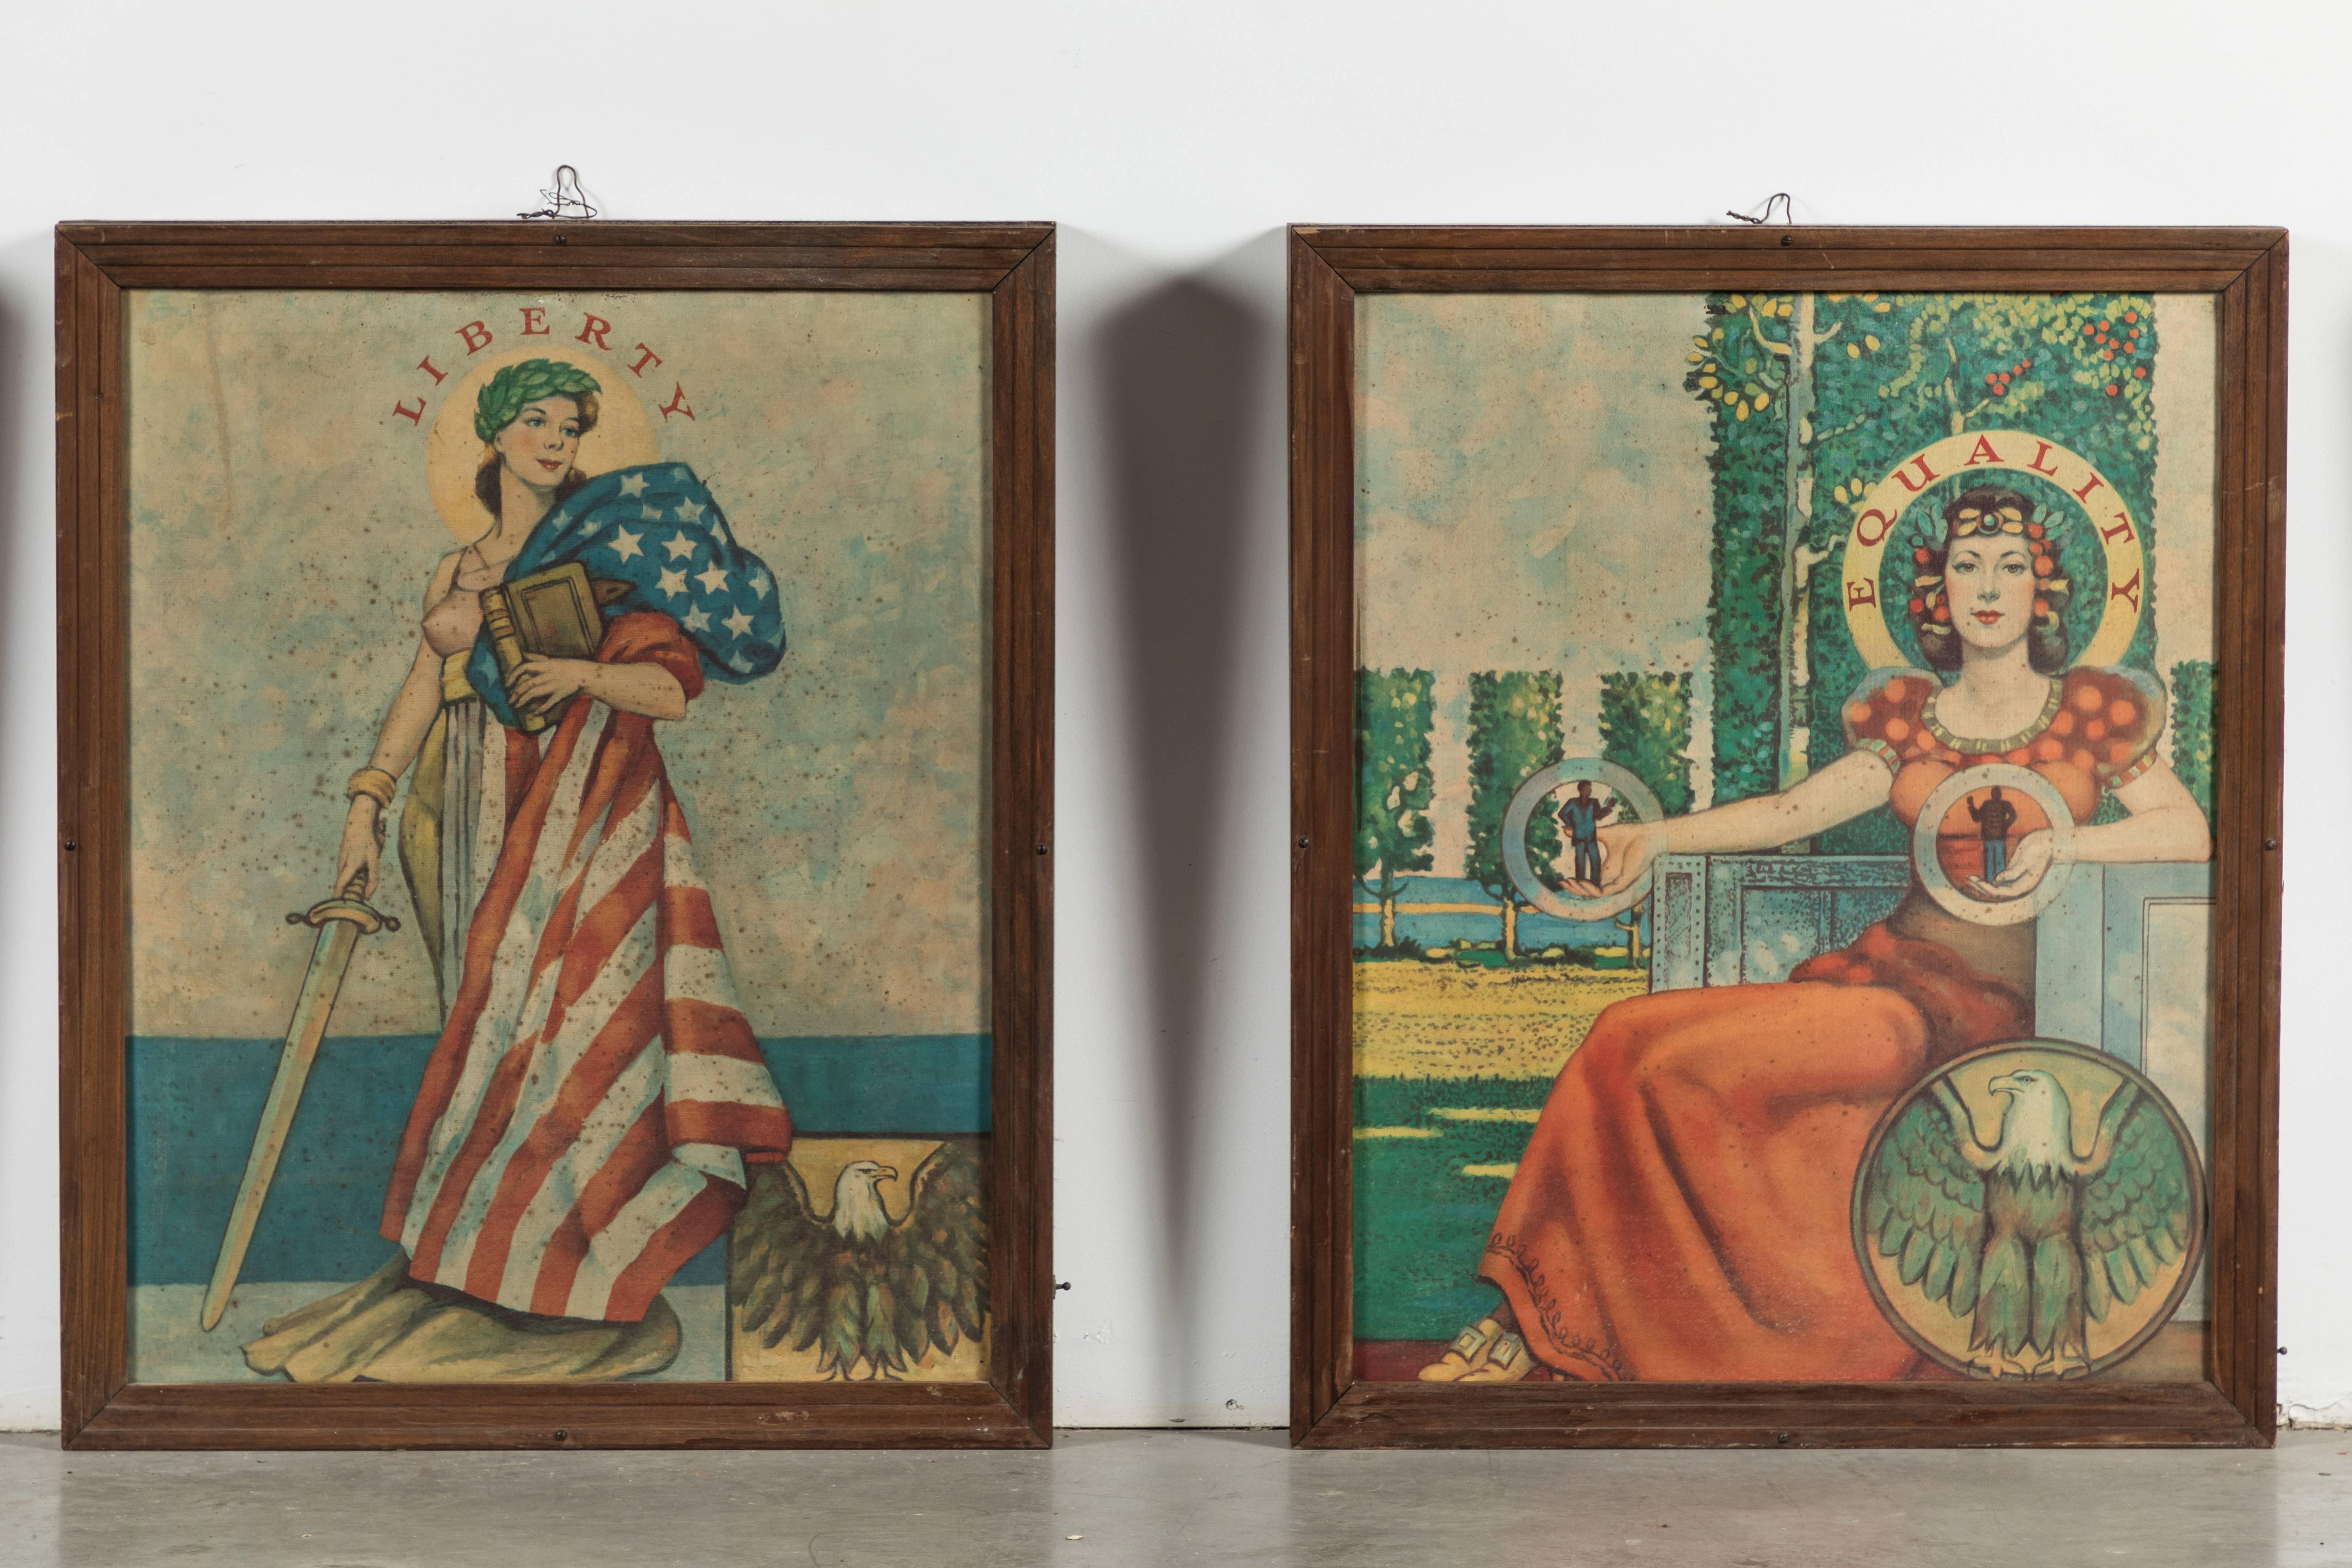 Late 1920s unique collection of American folk art hand painted lightbox wall panel signs created by a sign company in Chicago. The panels hung in the Appanose Country Courthouse in Centerville, Iowa. Liberty, Equality, Justice and Truth.